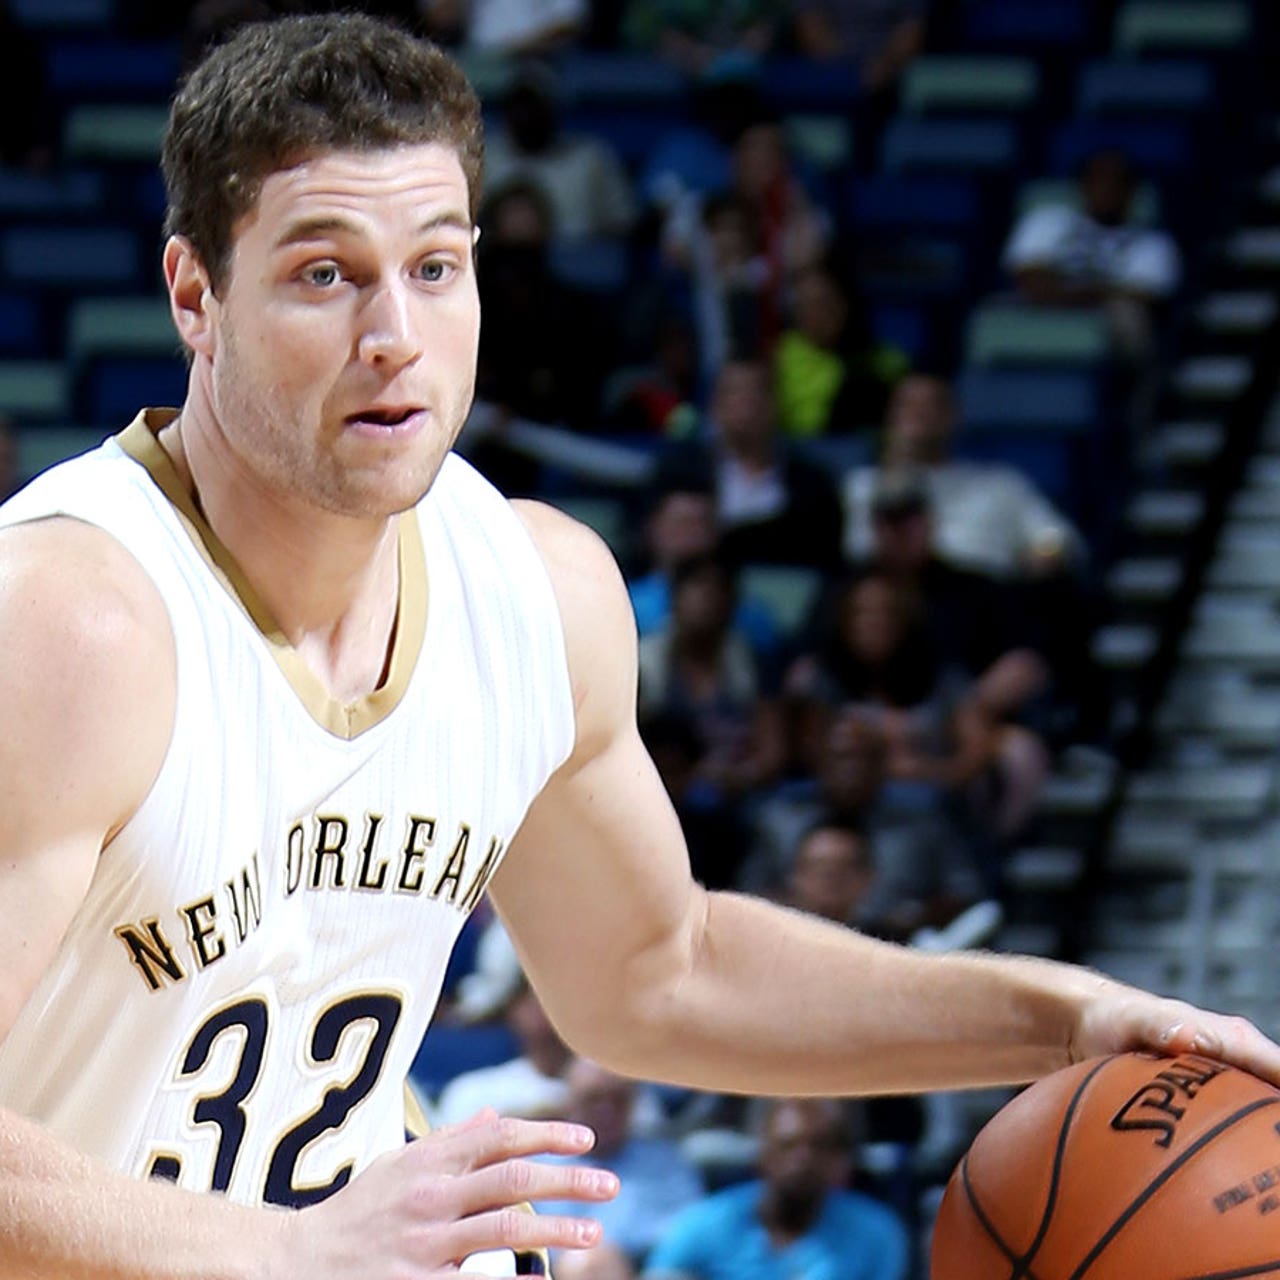 Jimmer Fredette signs with Greek basketball team